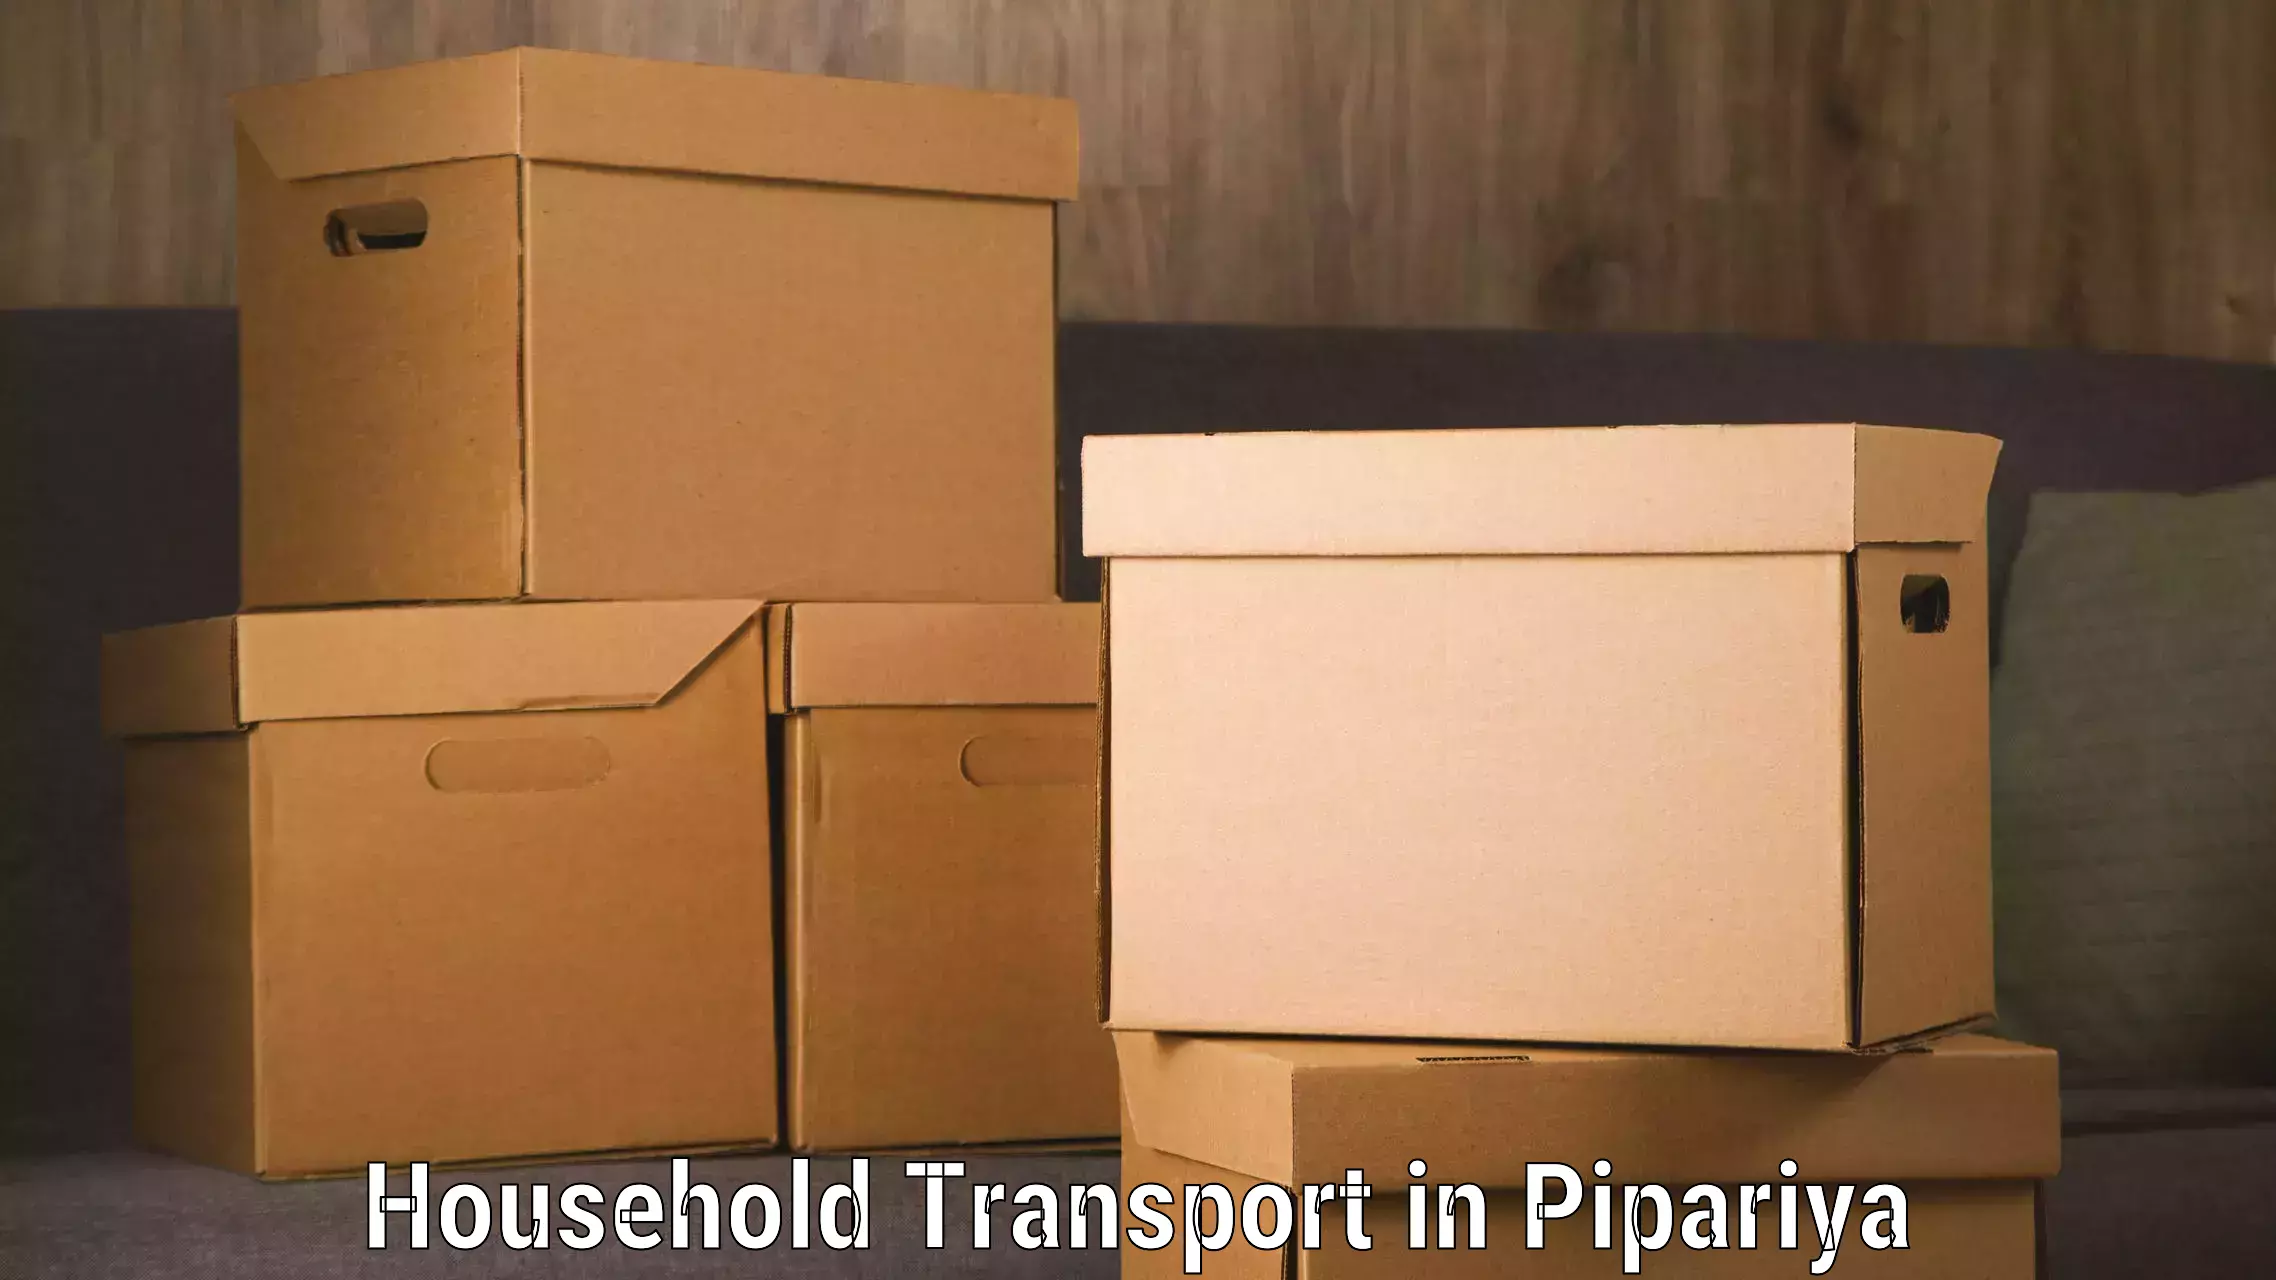 Moving and packing experts in Pipariya